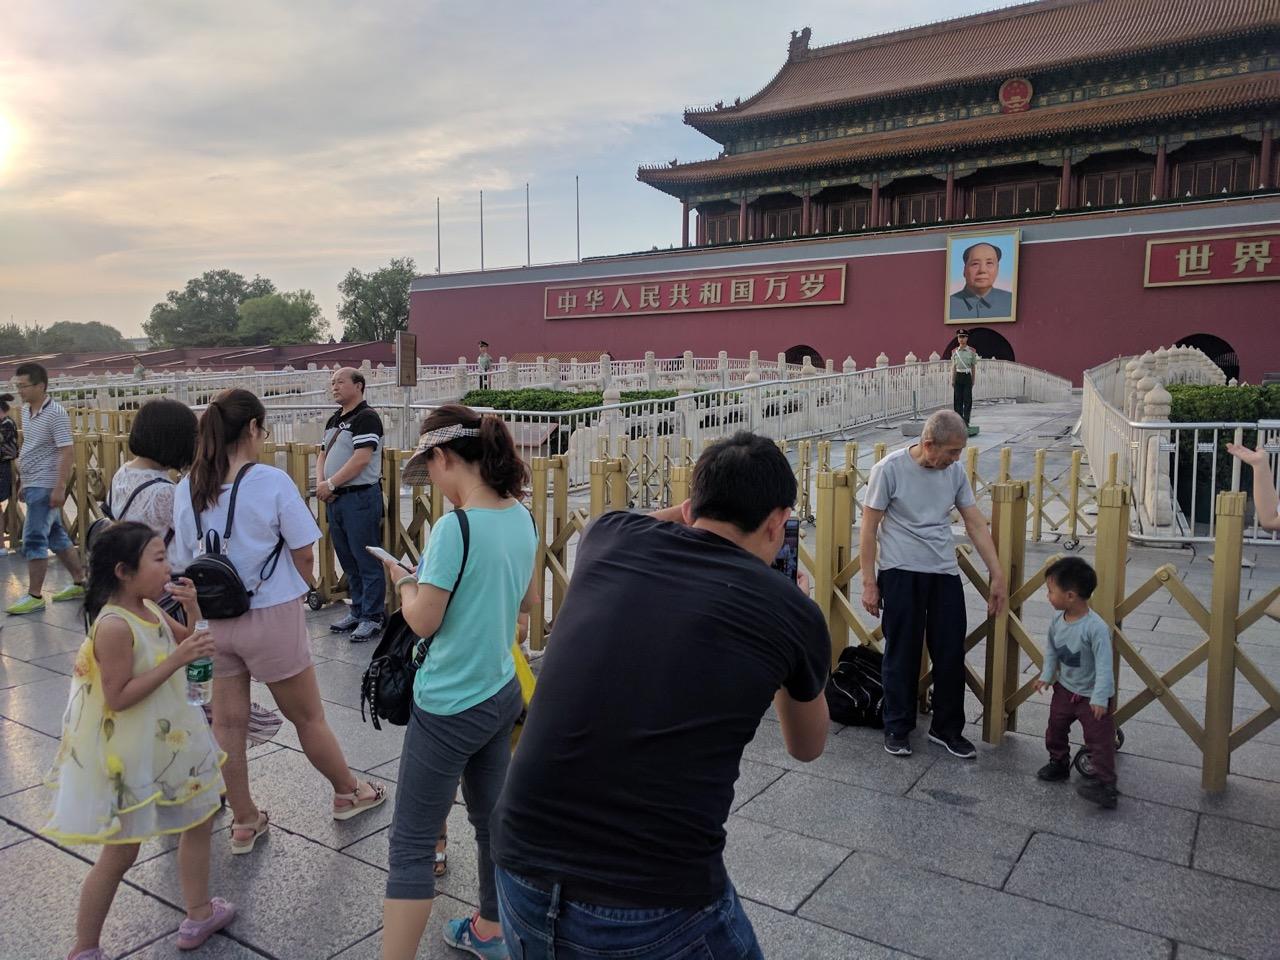 Chinese pose for photos near Mao Zedong's photo at the entrance to the Forbidden City in Tiananmen Square, Beijing